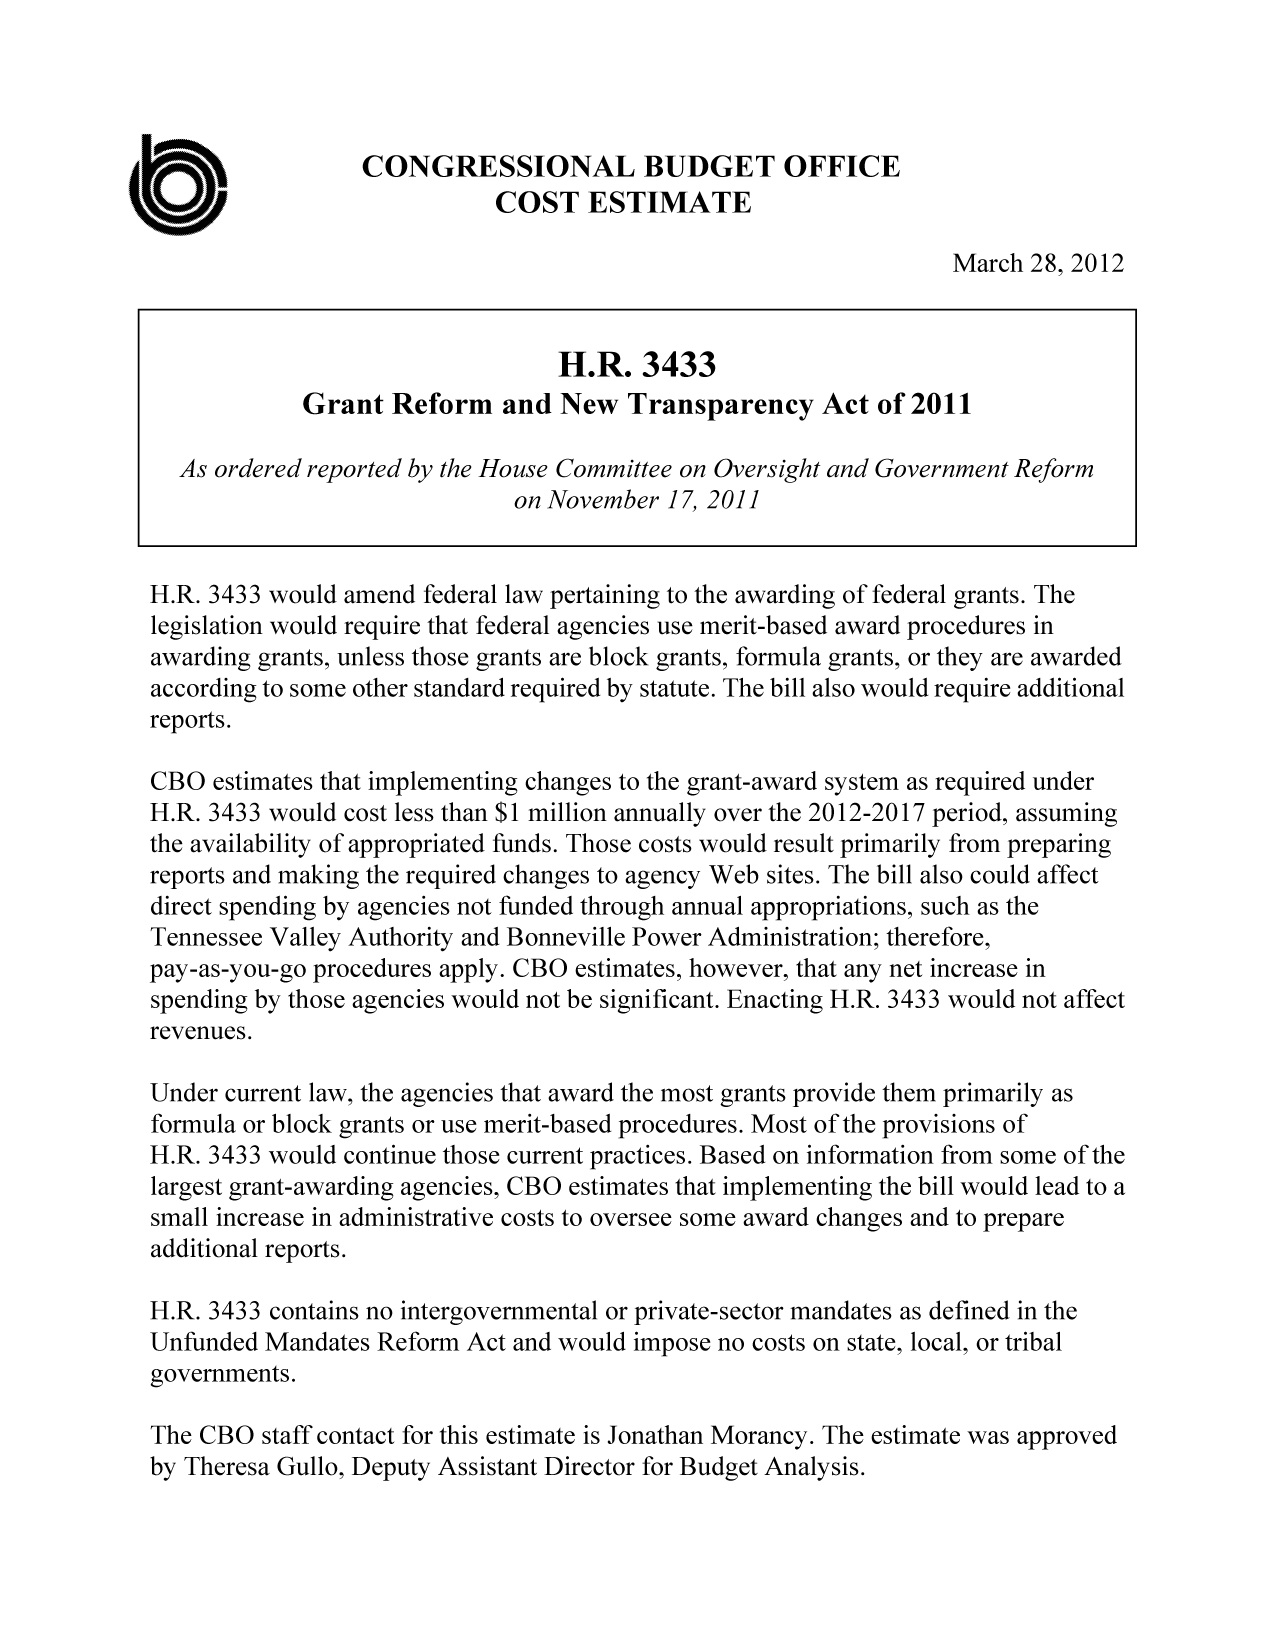 handle is hein.congrec/cbo10719 and id is 1 raw text is: CONGRESSIONAL BUDGET OFFICE
COST ESTIMATE
March 28, 2012
H.R. 3433
Grant Reform and New Transparency Act of 2011
As ordered reported by the House Committee on Oversight and Government Reform
on November 17, 2011
H.R. 3433 would amend federal law pertaining to the awarding of federal grants. The
legislation would require that federal agencies use merit-based award procedures in
awarding grants, unless those grants are block grants, formula grants, or they are awarded
according to some other standard required by statute. The bill also would require additional
reports.
CBO estimates that implementing changes to the grant-award system as required under
H.R. 3433 would cost less than $1 million annually over the 2012-2017 period, assuming
the availability of appropriated funds. Those costs would result primarily from preparing
reports and making the required changes to agency Web sites. The bill also could affect
direct spending by agencies not funded through annual appropriations, such as the
Tennessee Valley Authority and Bonneville Power Administration; therefore,
pay-as-you-go procedures apply. CBO estimates, however, that any net increase in
spending by those agencies would not be significant. Enacting H.R. 3433 would not affect
revenues.
Under current law, the agencies that award the most grants provide them primarily as
formula or block grants or use merit-based procedures. Most of the provisions of
H.R. 3433 would continue those current practices. Based on information from some of the
largest grant-awarding agencies, CBO estimates that implementing the bill would lead to a
small increase in administrative costs to oversee some award changes and to prepare
additional reports.
H.R. 3433 contains no intergovernmental or private-sector mandates as defined in the
Unfunded Mandates Reform Act and would impose no costs on state, local, or tribal
governments.
The CBO staff contact for this estimate is Jonathan Morancy. The estimate was approved
by Theresa Gullo, Deputy Assistant Director for Budget Analysis.


